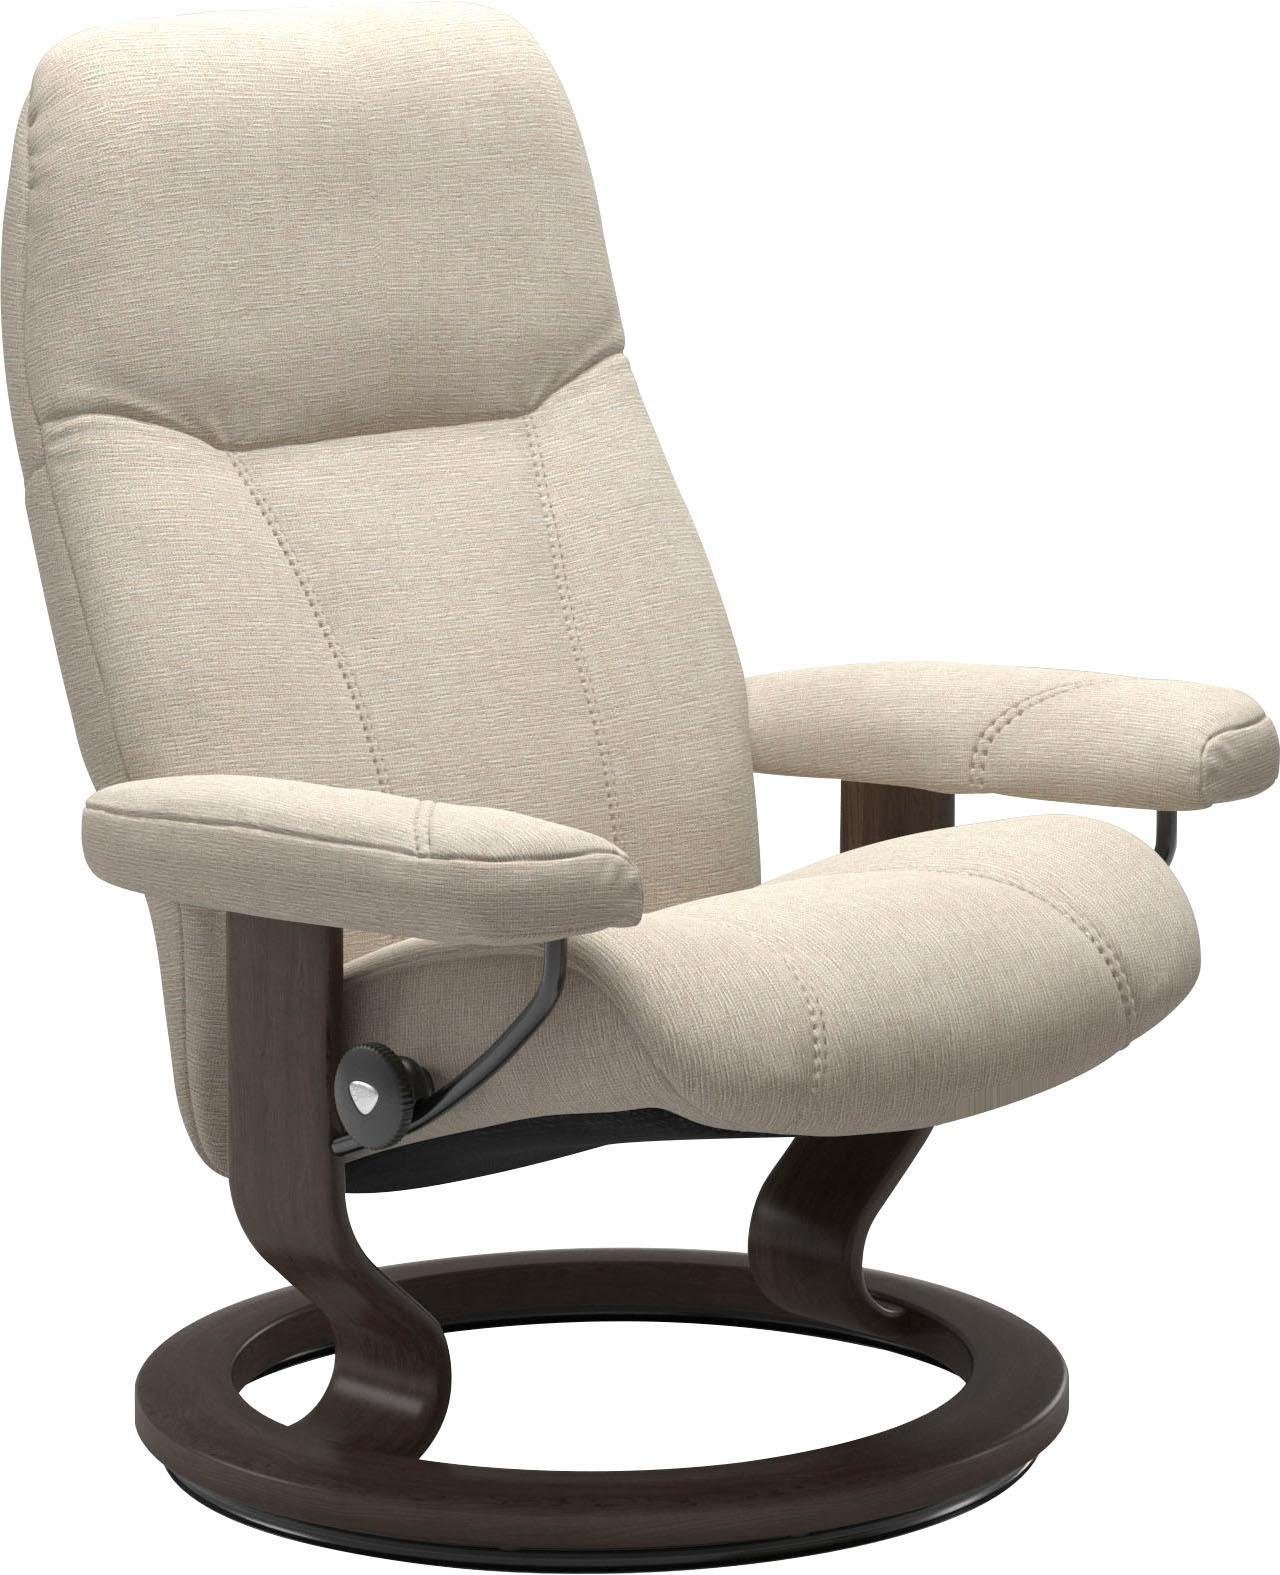 Relaxsessel Gestell Wenge Consul, Stressless® mit Base, Größe M, Classic